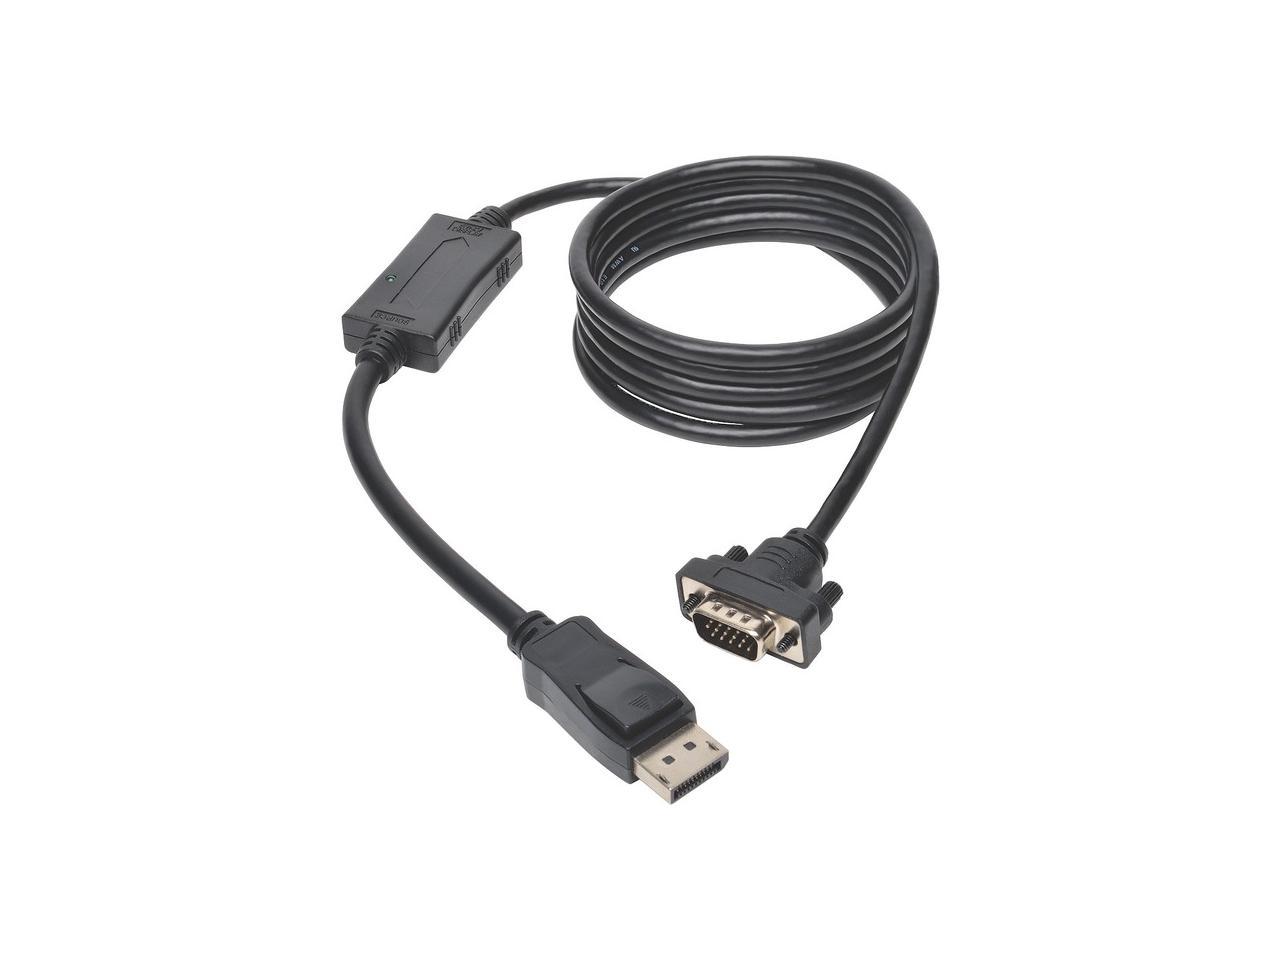 Tripp Lite P581-006-VGA-V2 6 ft. DisplayPort 1.2 to VGA Active Adapter Cable, DP with Latches to HD15 (M/M), 1920x1200/1080p